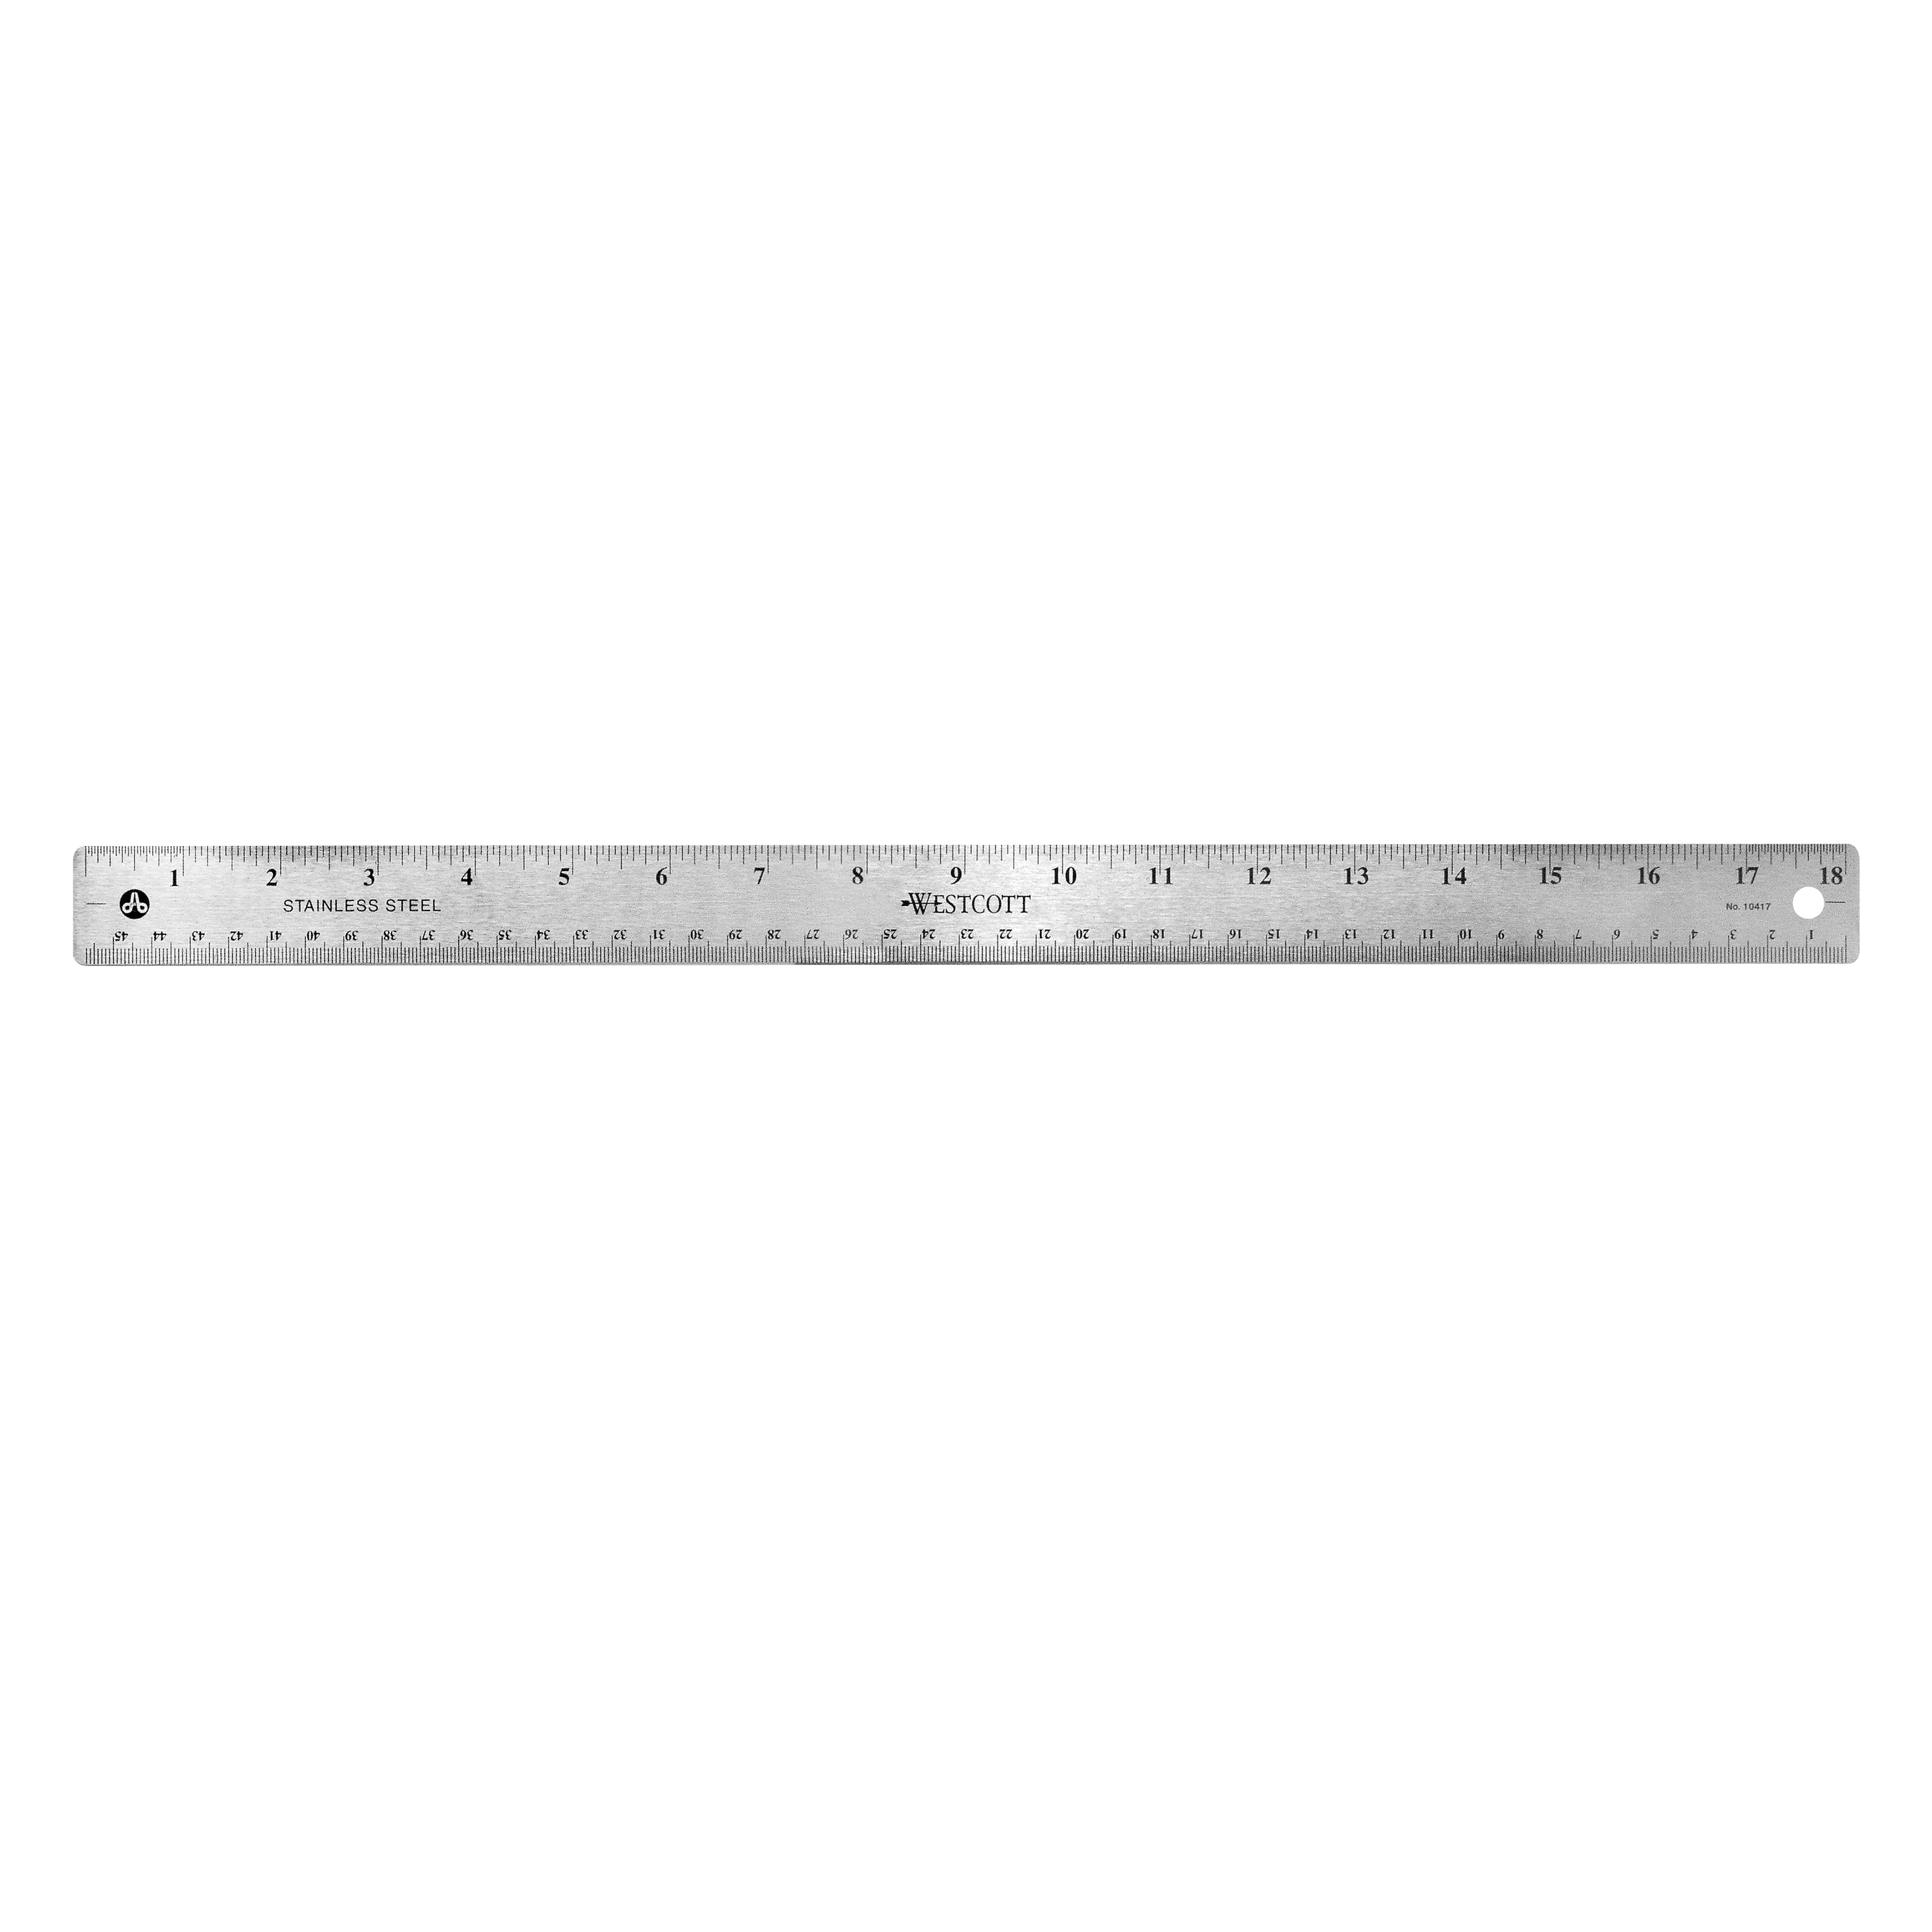 Westcott Non-Slip Stainless Steel Ruler, 18", Silver, Metric, for Office, 0.13 lbs., (1 Each) - image 3 of 10